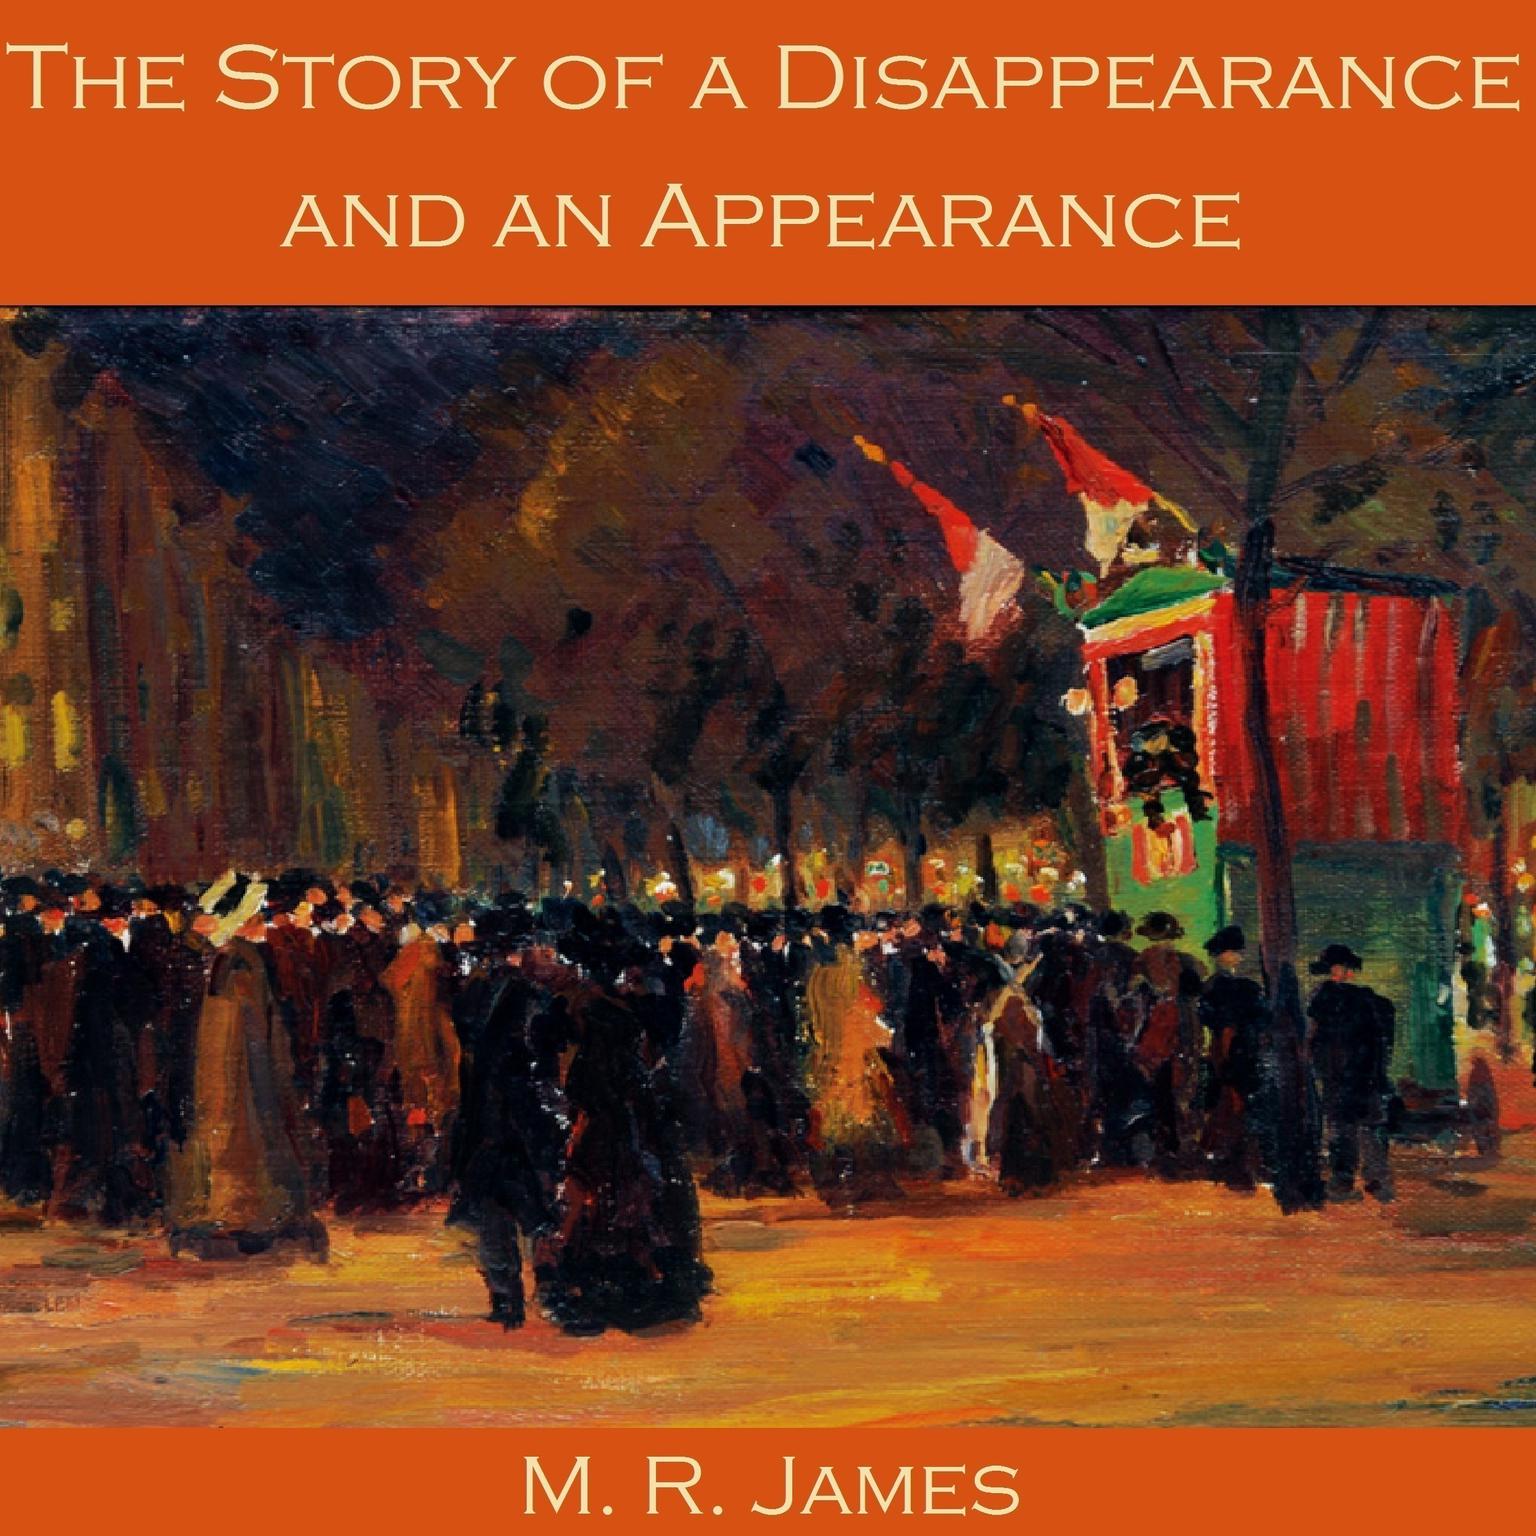 The Story of a Disappearance and an Appearance Audiobook, by M. R. James